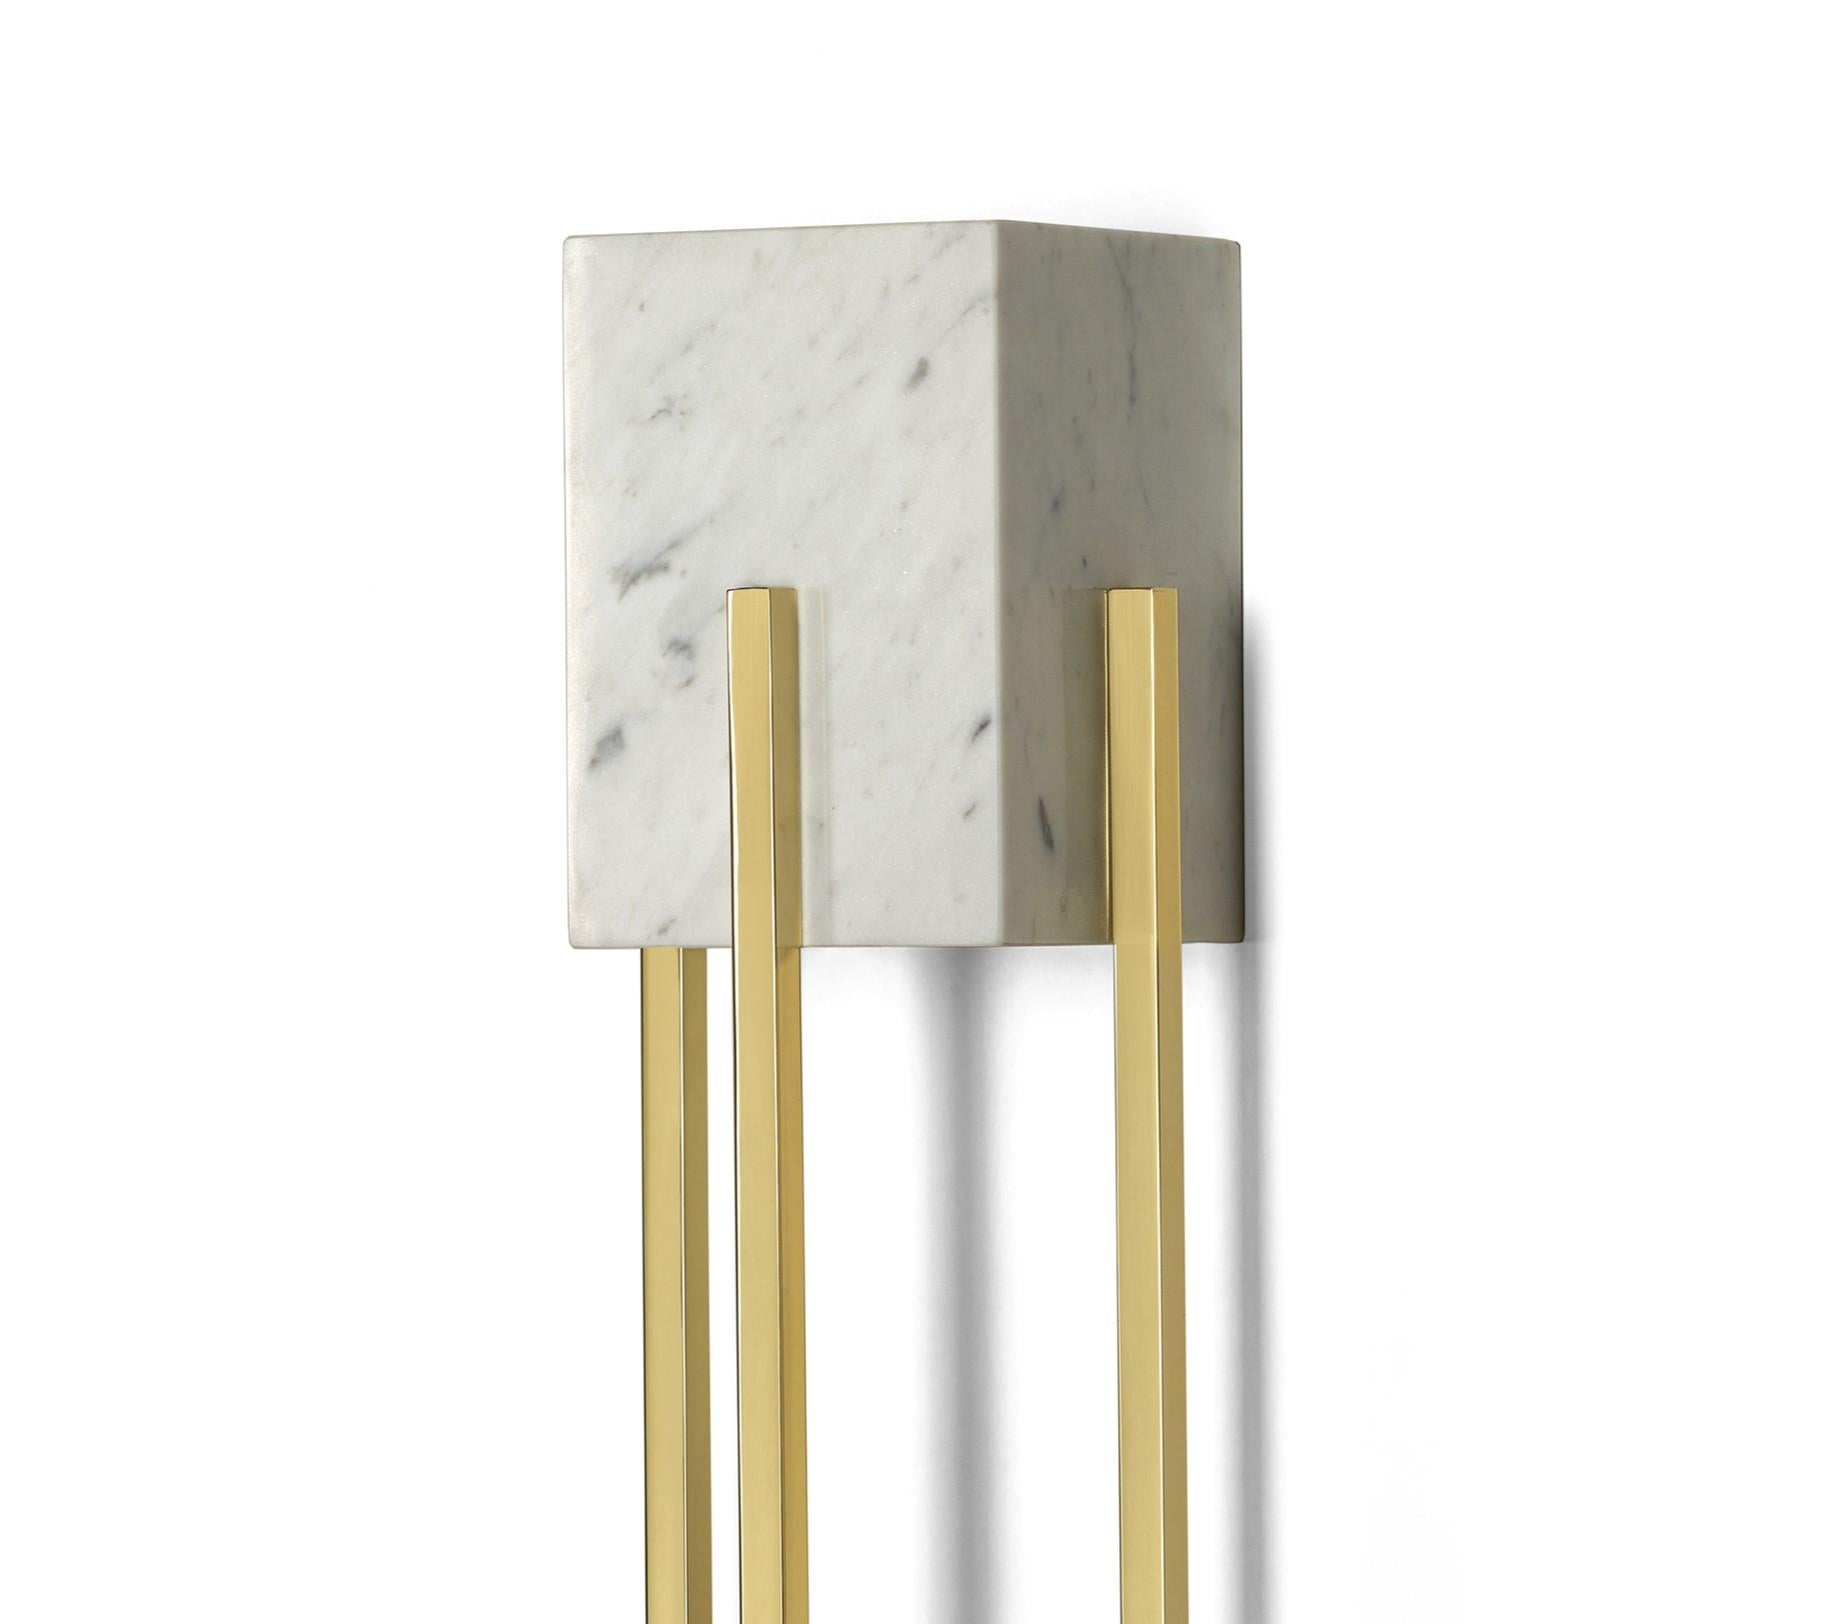 Portuguese Looshaus Carrara Marble and Brass Wall Lamp by InsidherLand For Sale